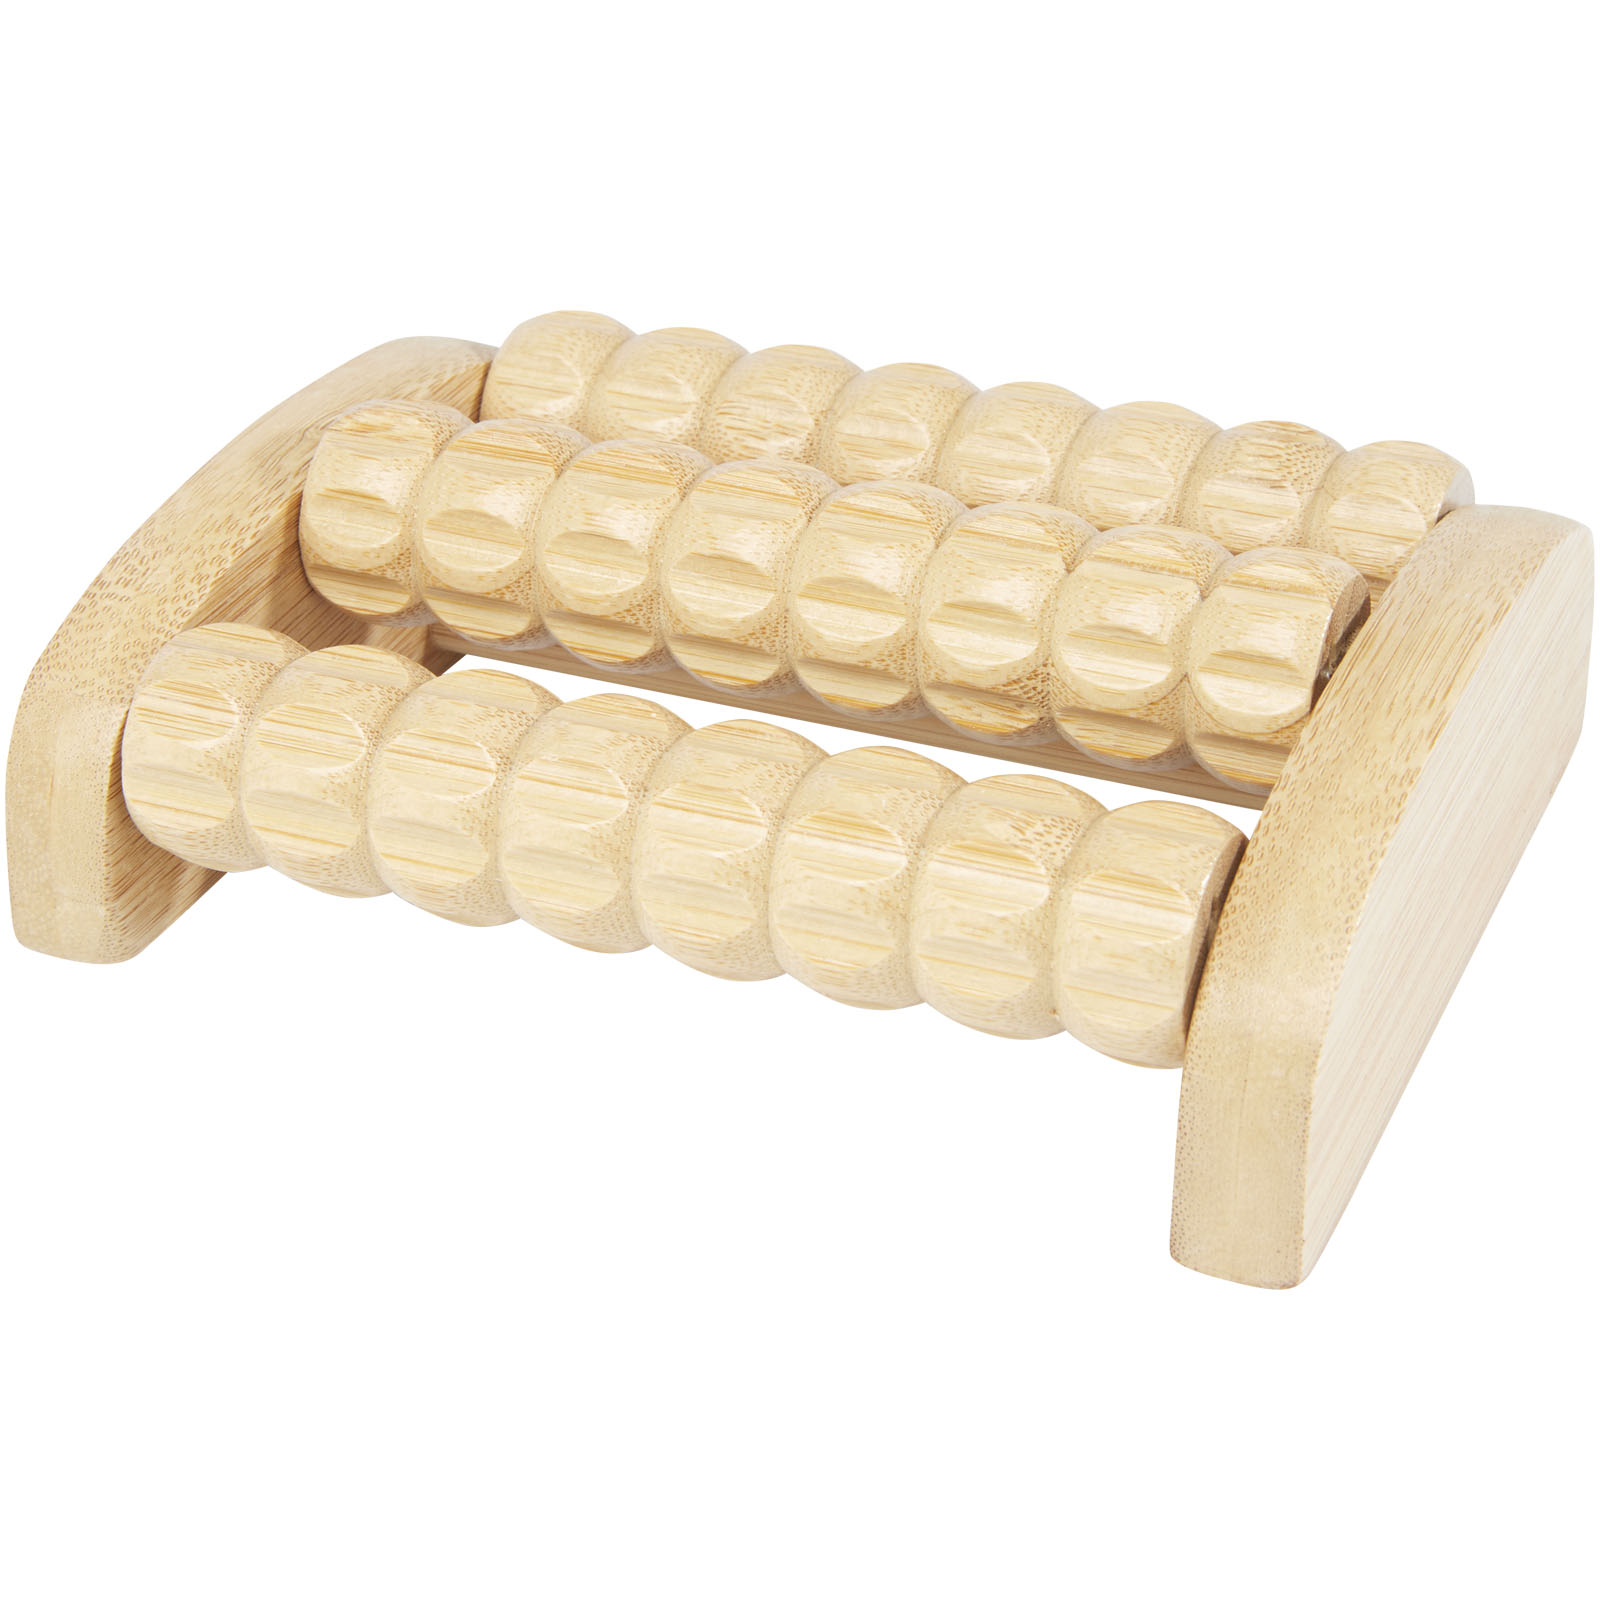 Health & Personal Care - Venis bamboo foot massager